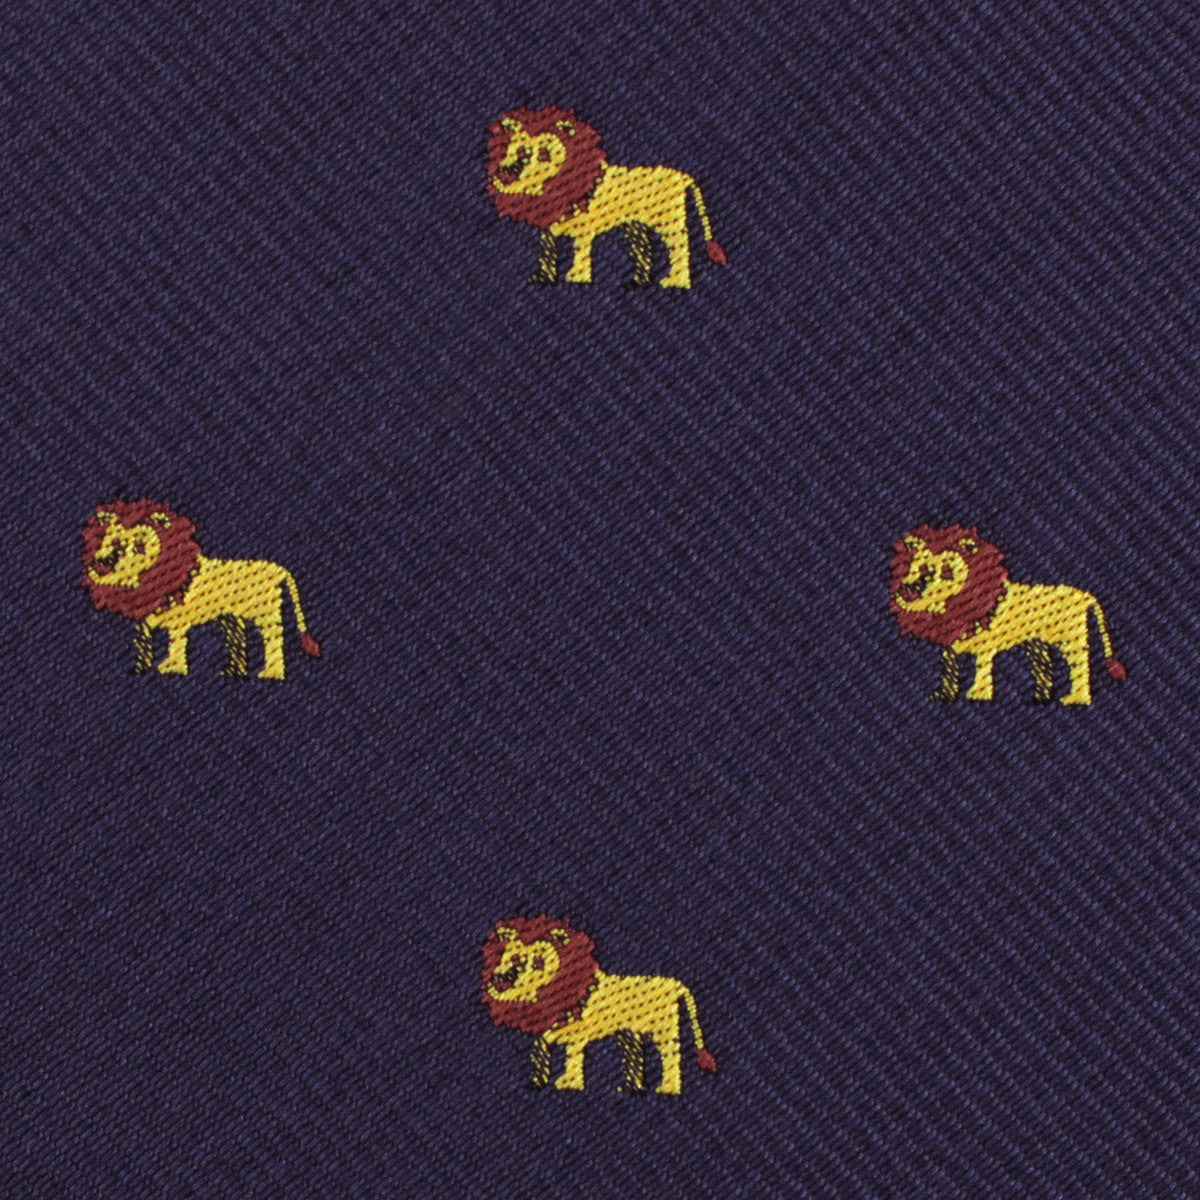 African Lion Fabric Skinny Tie